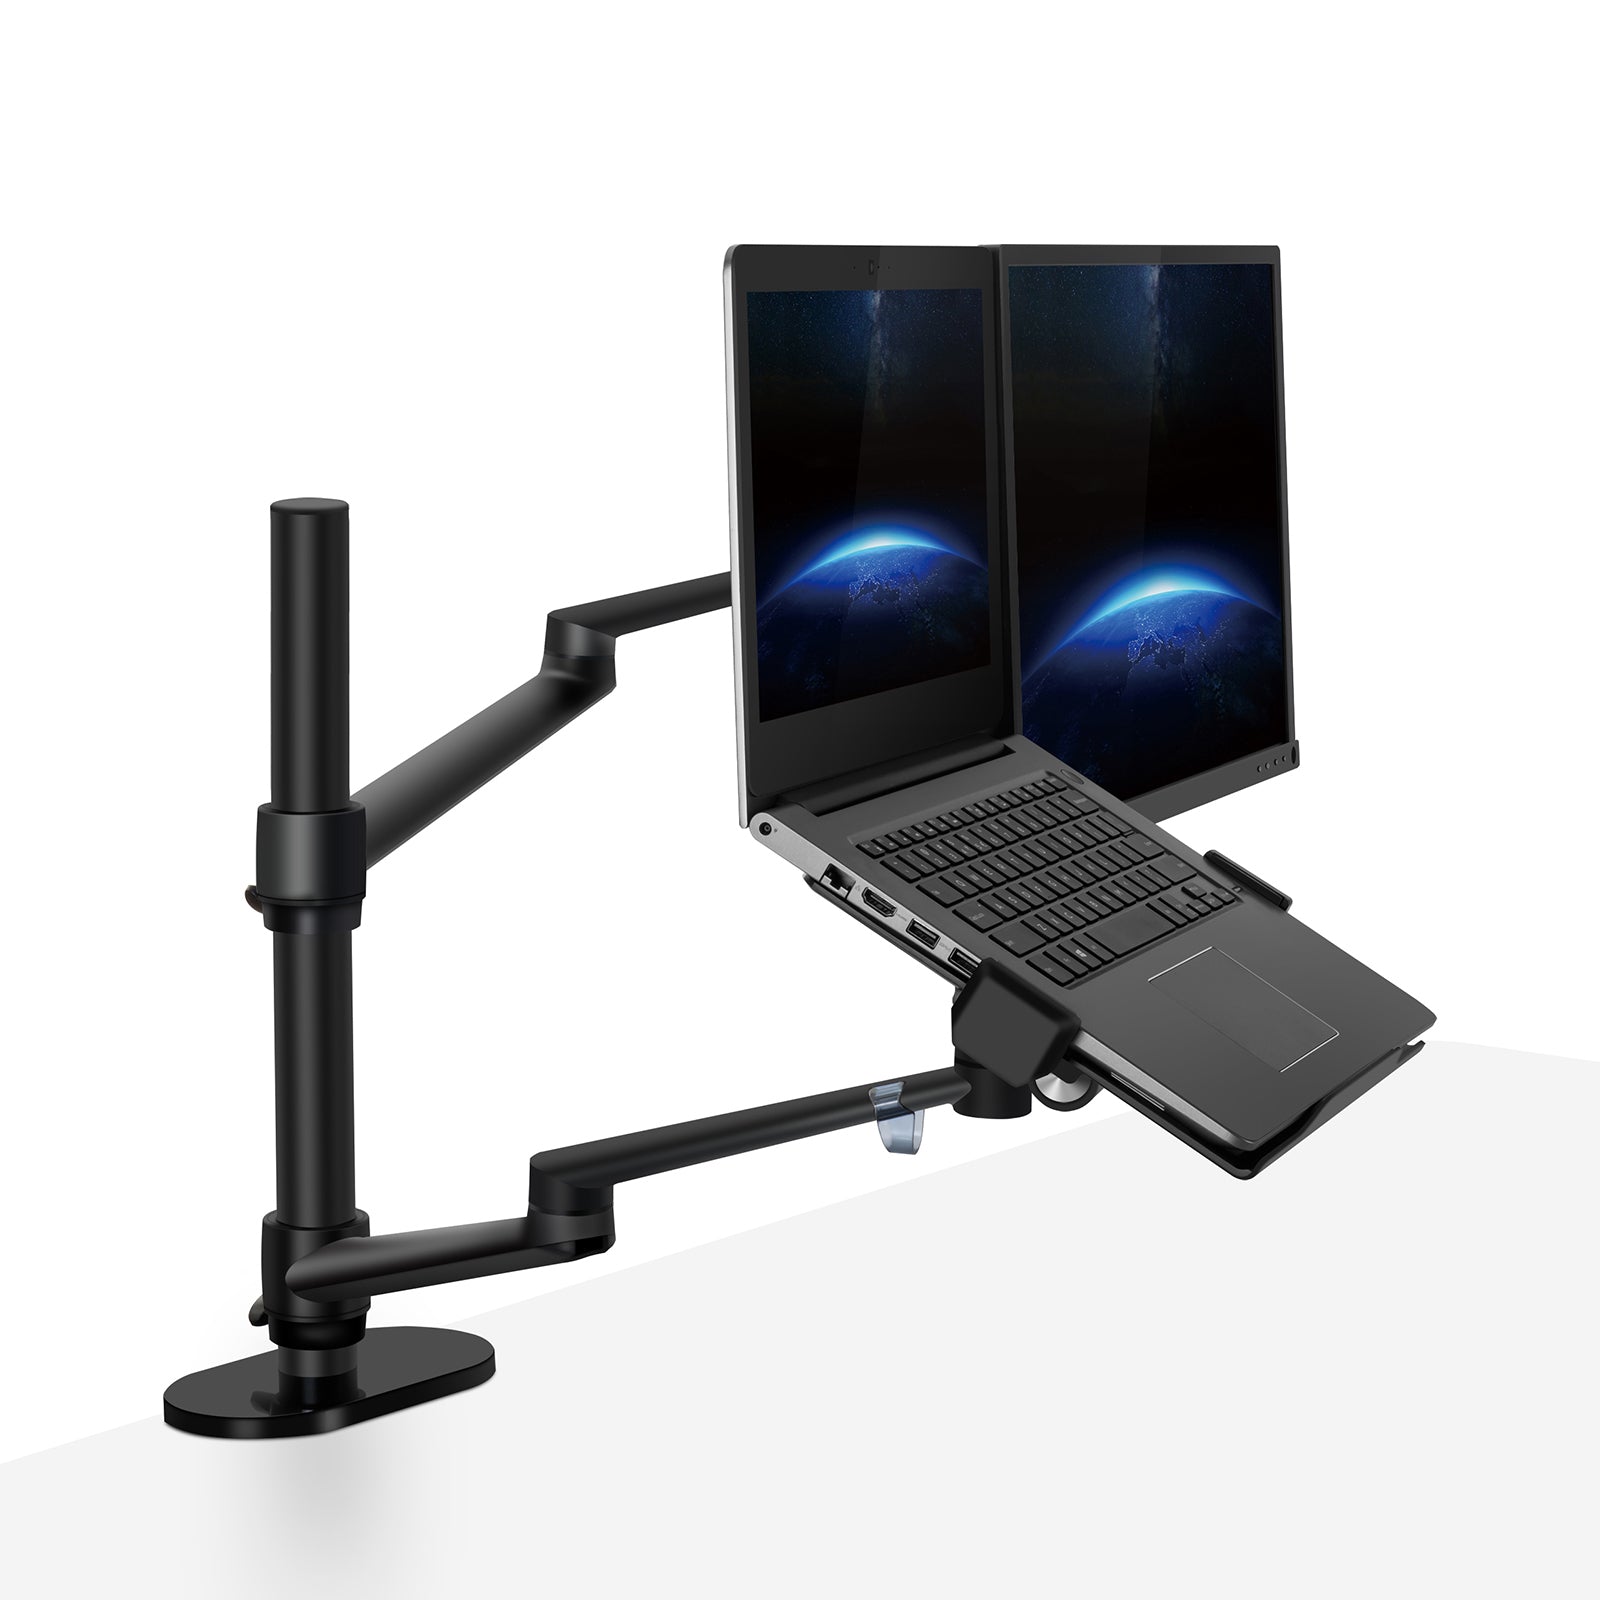 Thingy Club Dual Arm Monitor Laptop Mount Desk Mount Stand For Up T